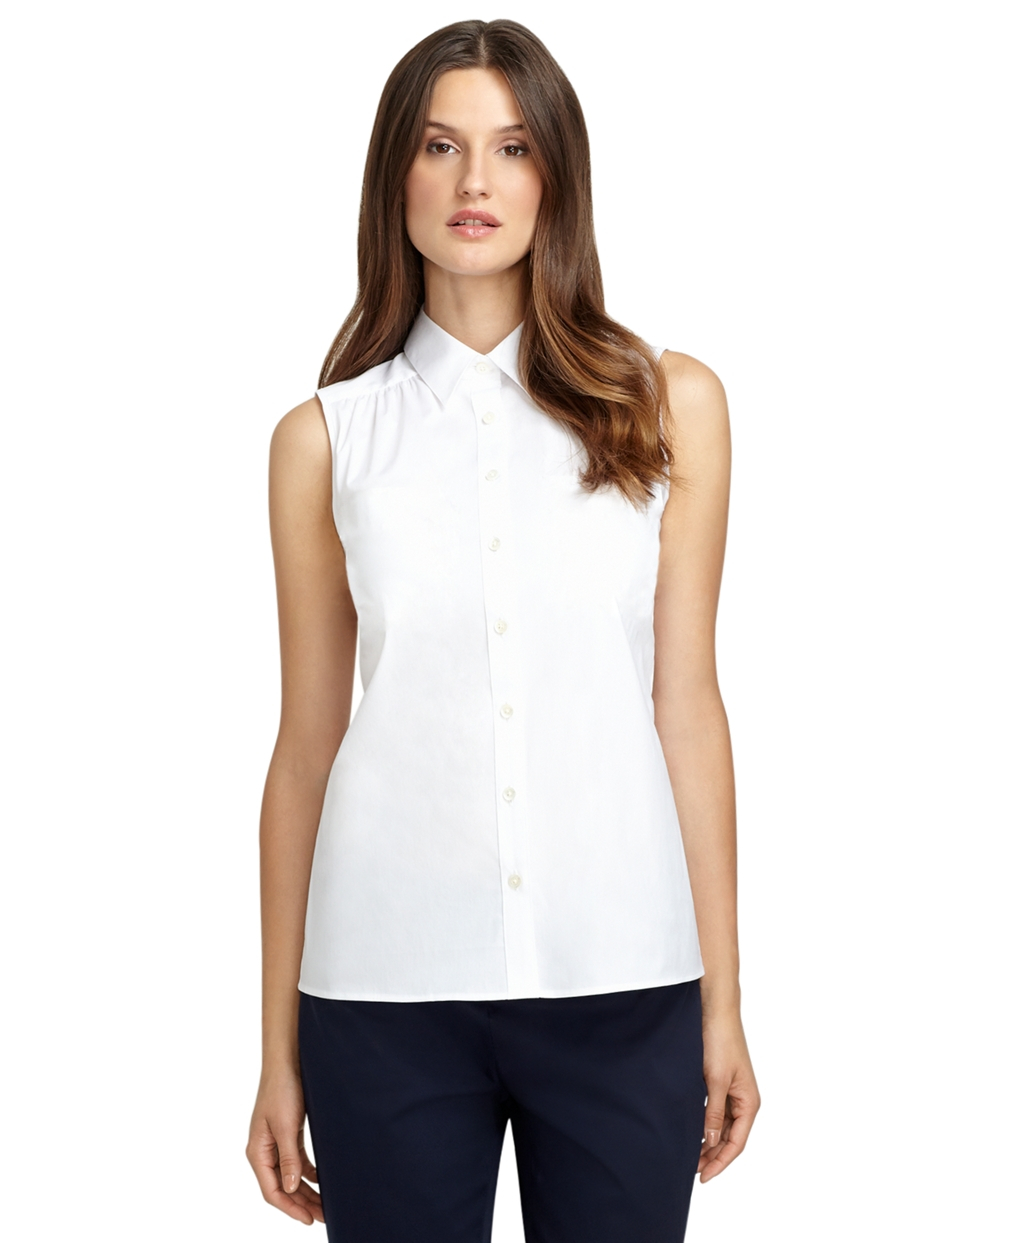 Lyst - Brooks brothers Sleeveless Cotton Shirt in White